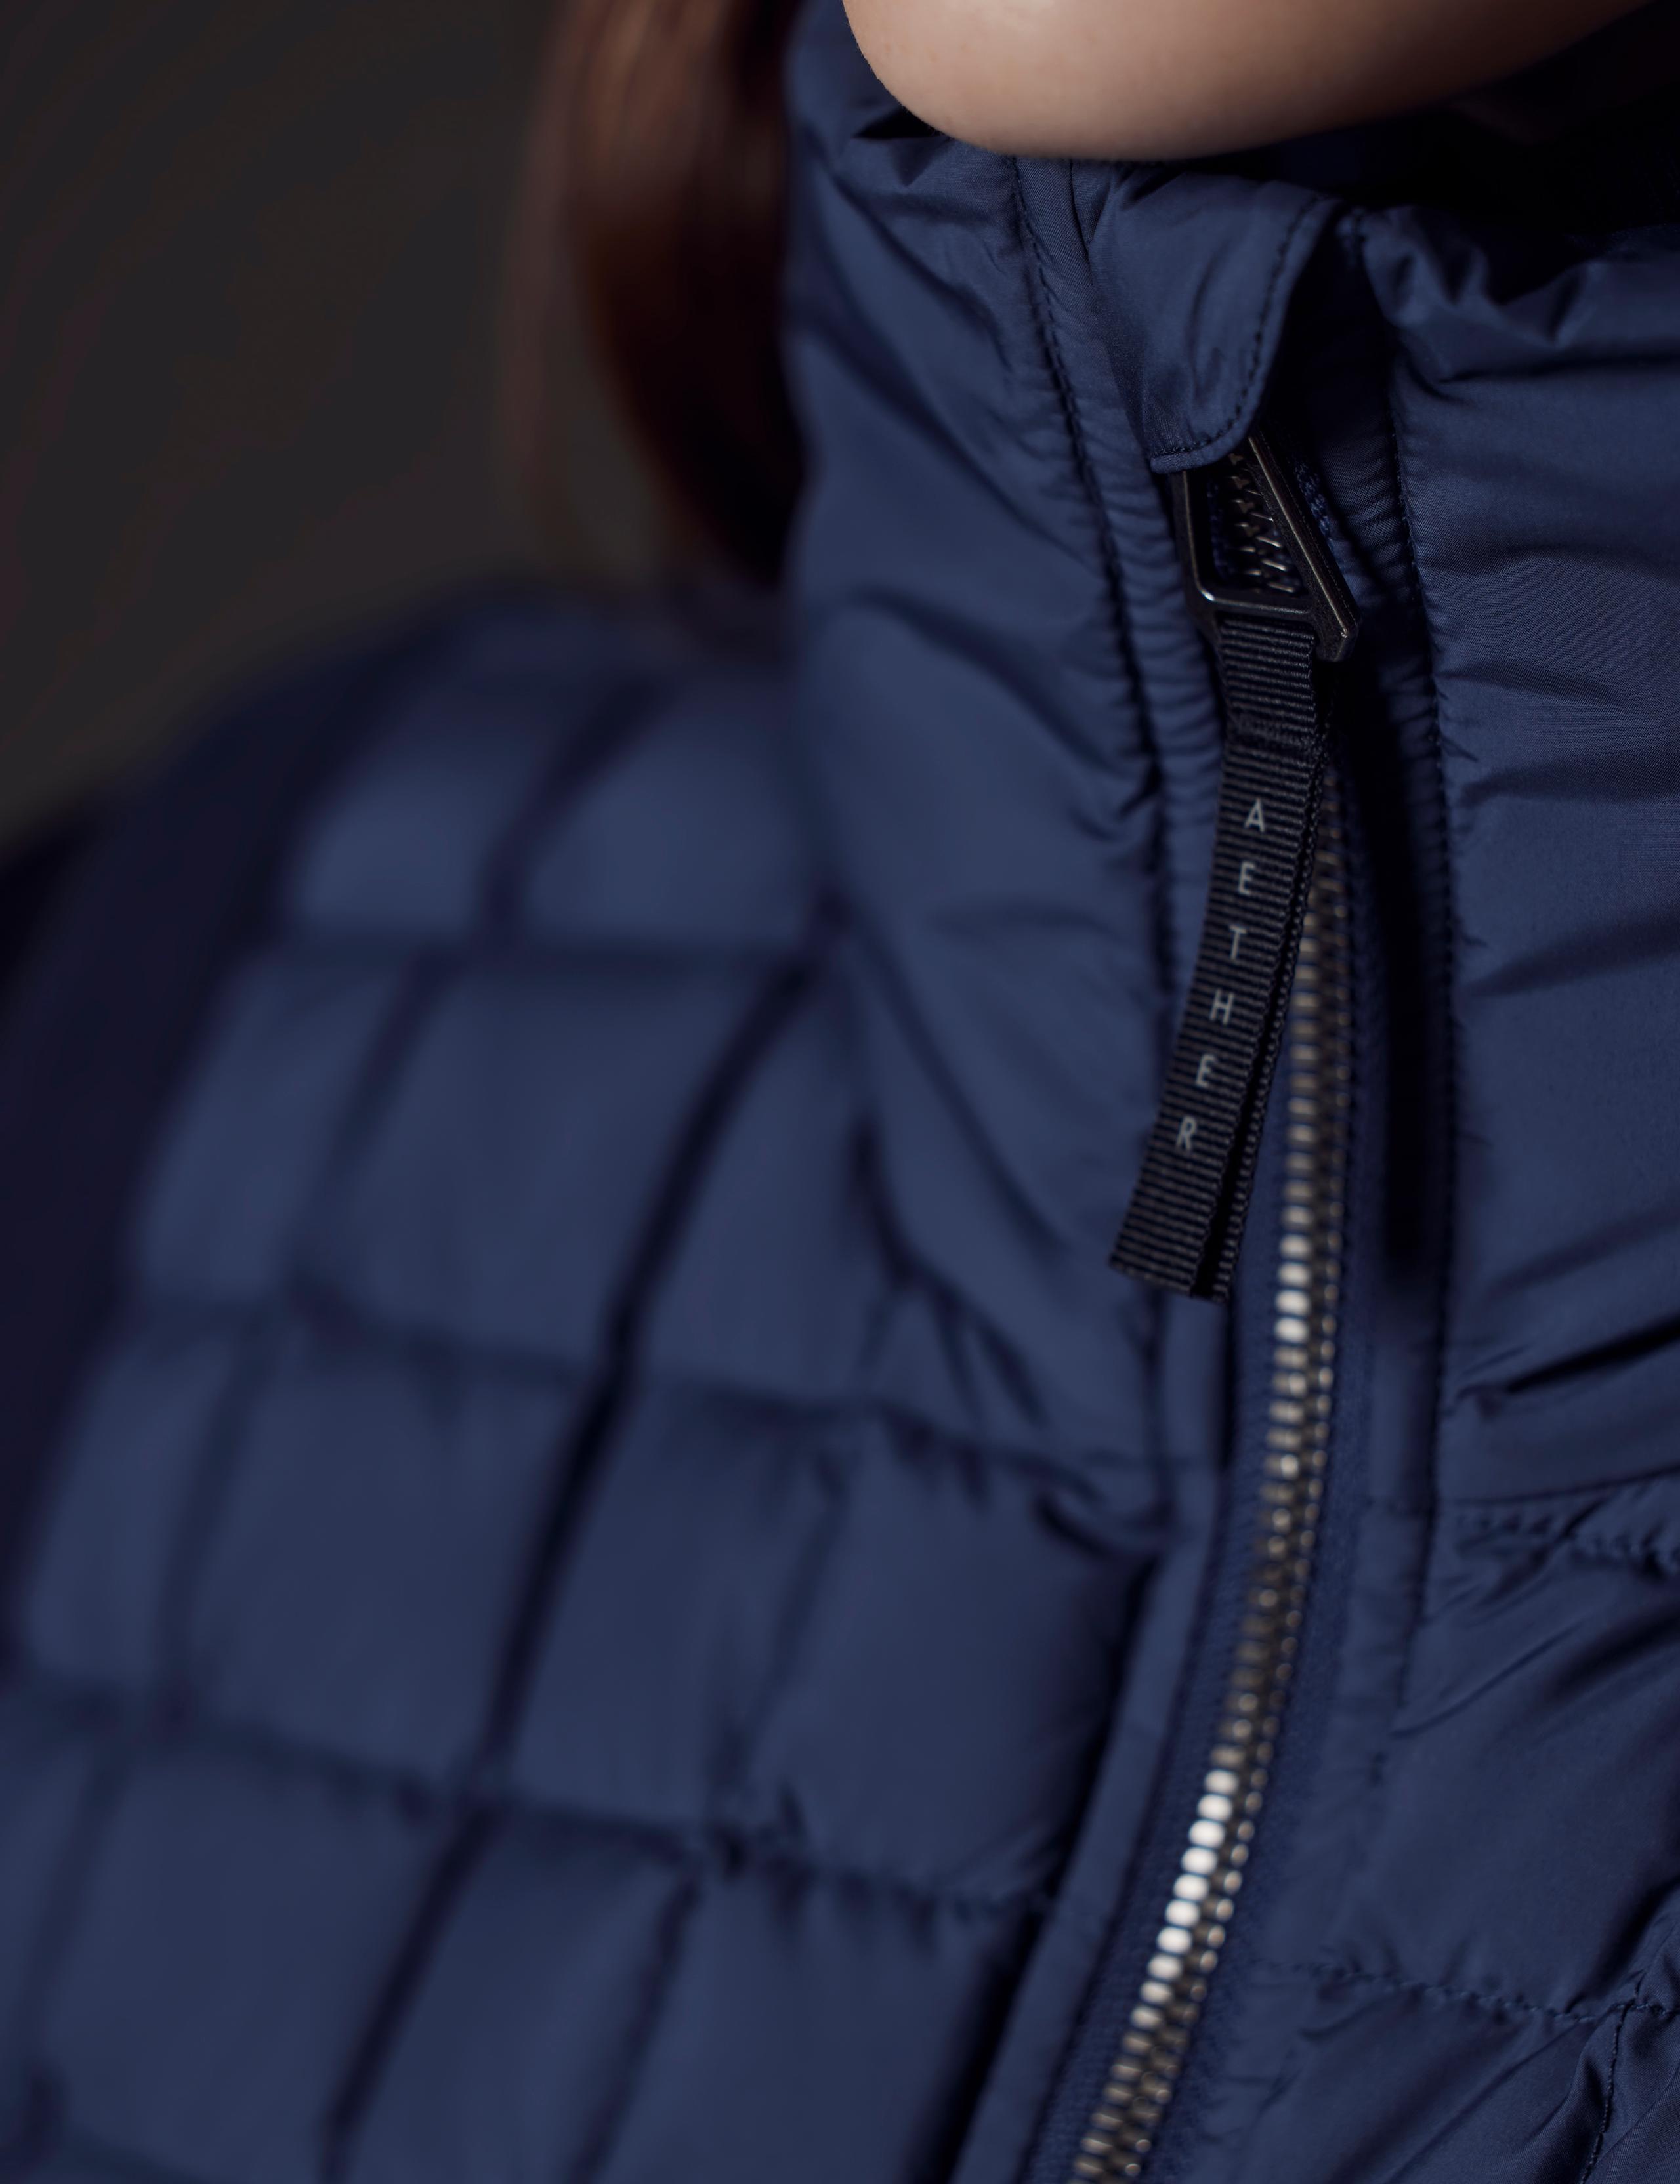 Detailed shot of Phase Zip front zipper and chin.